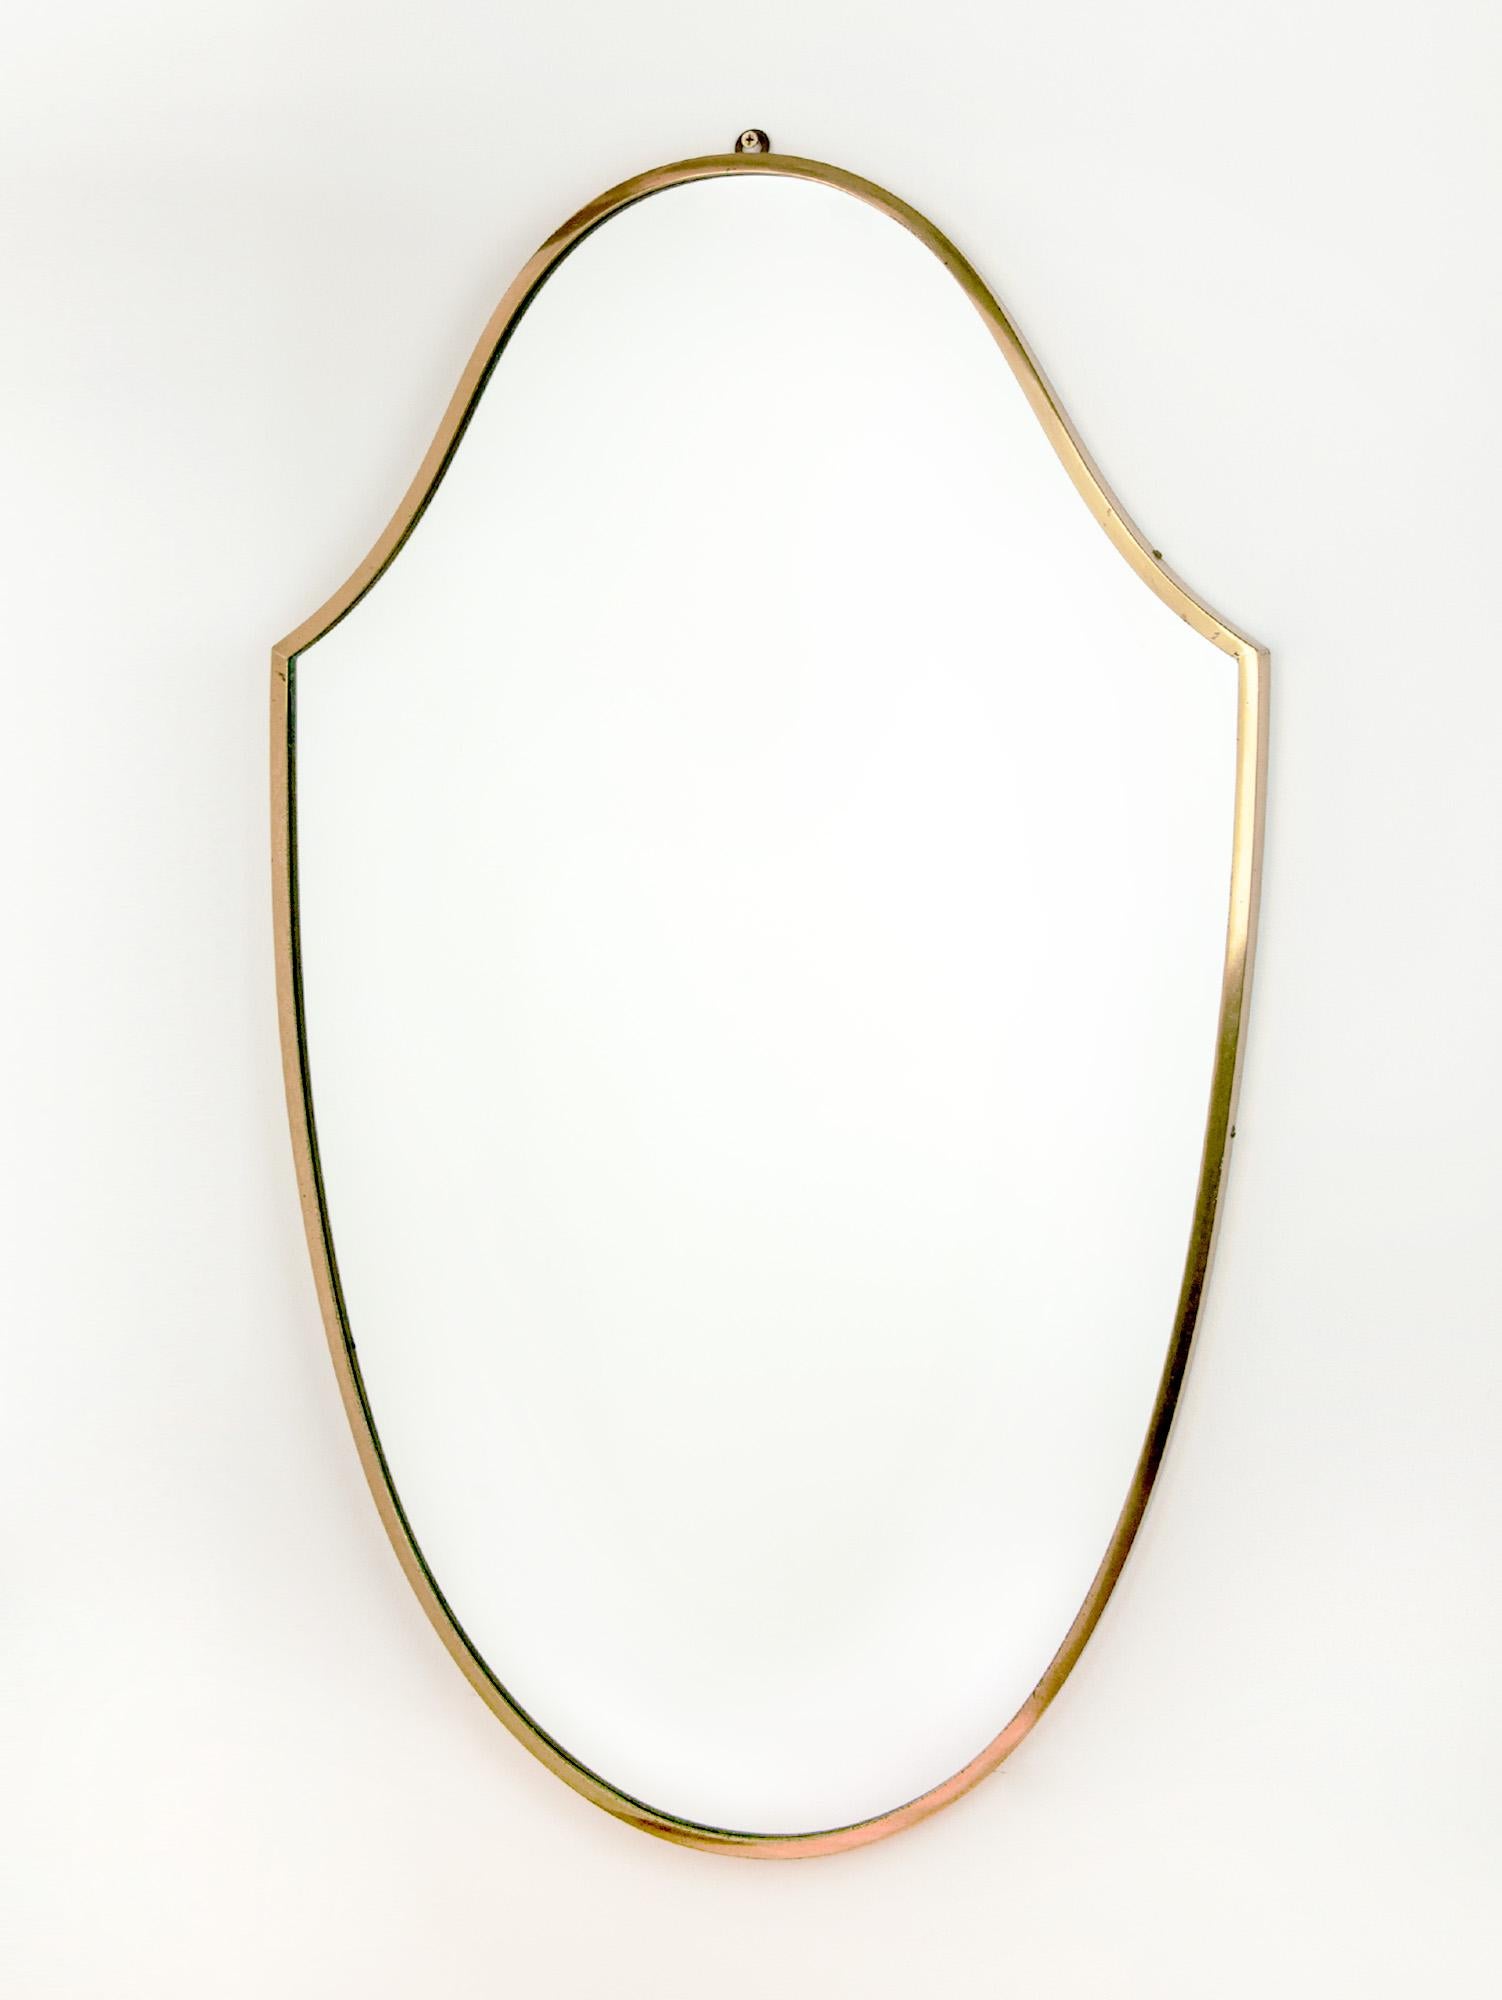 Large vintage Italian brass mirror with a brass surround. The classic shield shape epitomizes Italian modernist design. The brass frame holds the glass and wooden backing with a hook above the mirror. Made circa the 1950s.

Great vintage condition